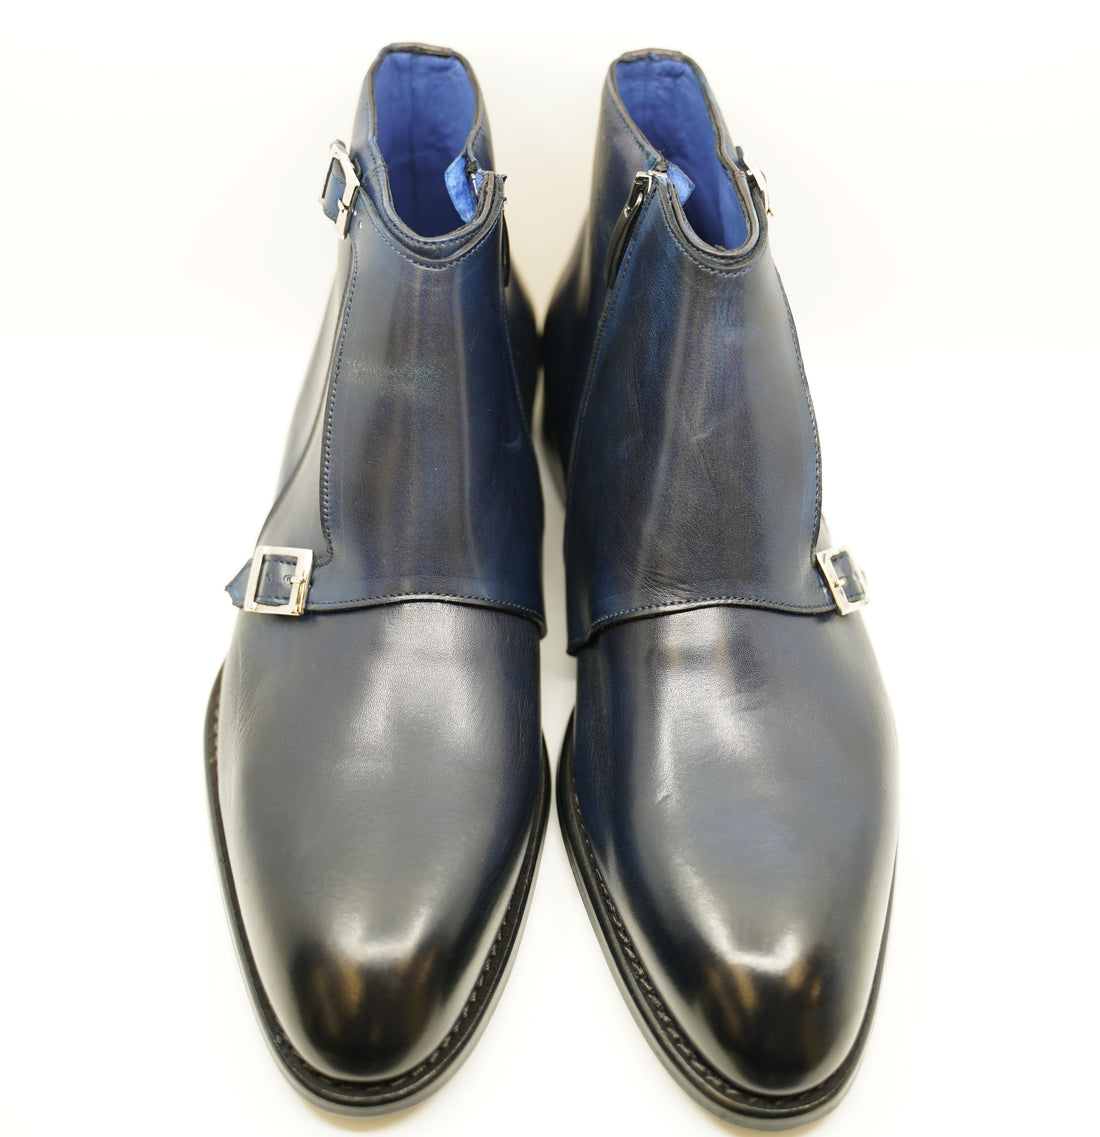 Andrea Nobile  - Dark Blue ankle boots with double monk strap